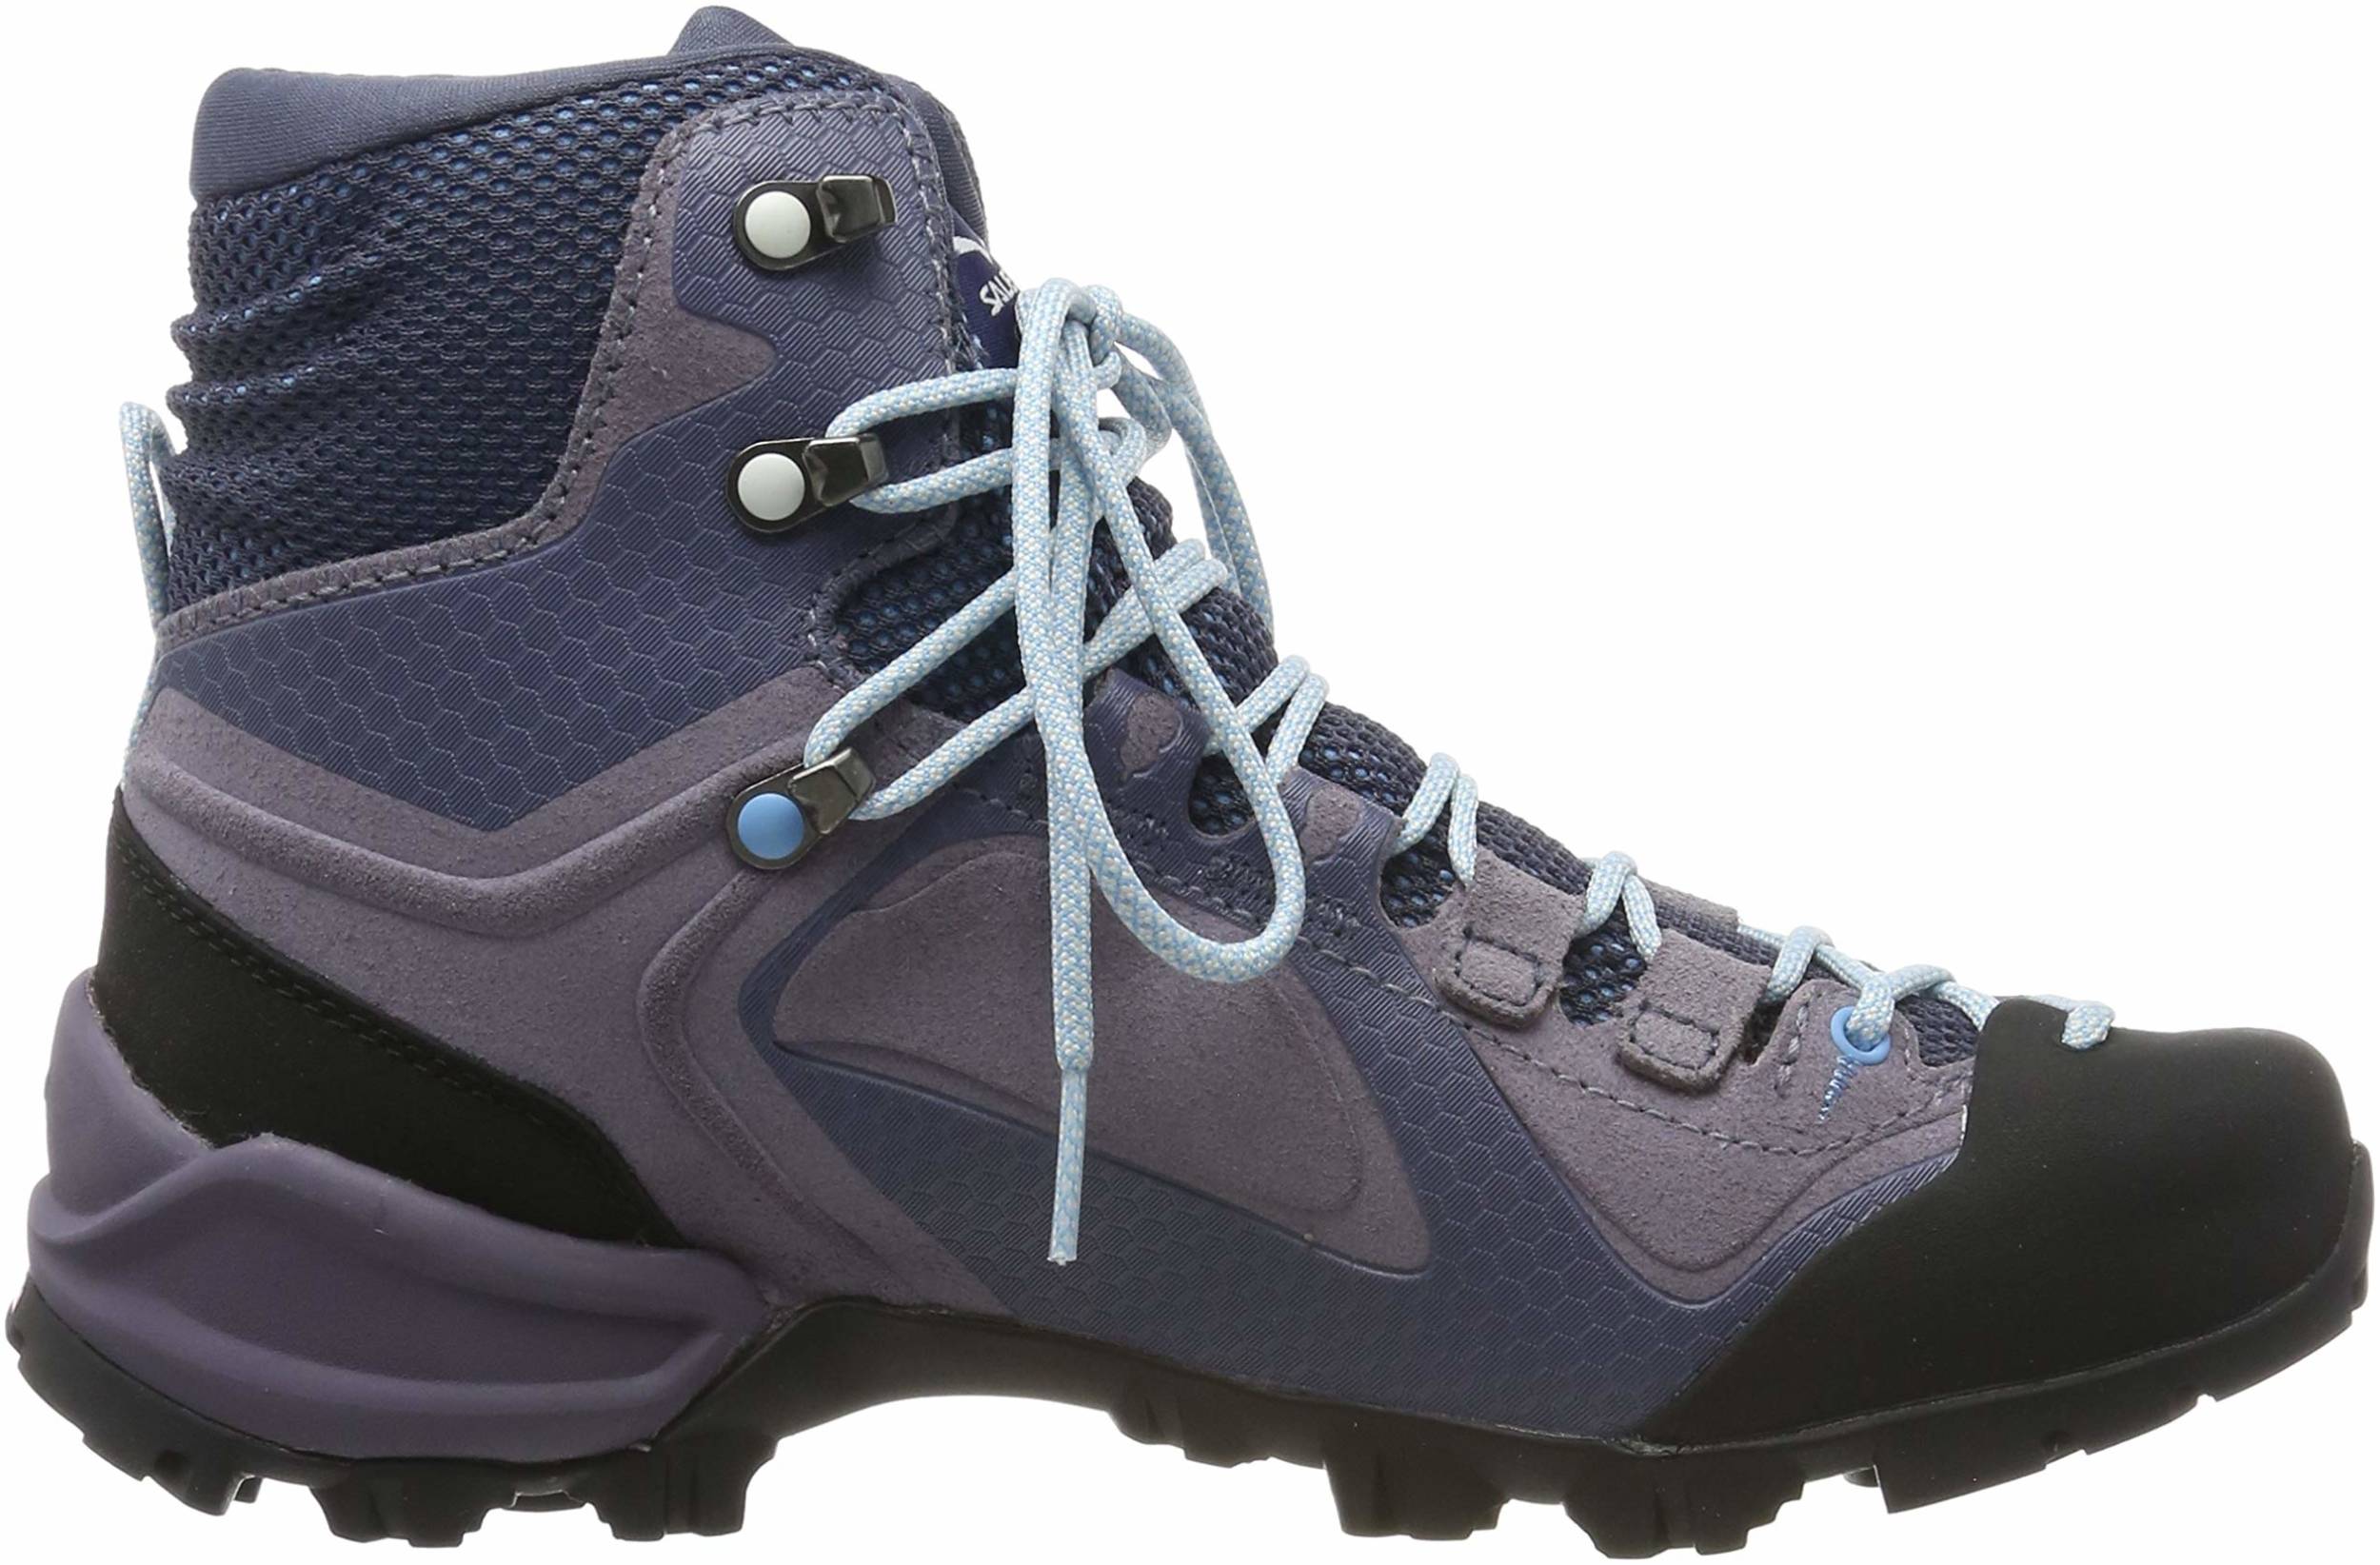 Review of Salewa Alpenviolet Mid GTX 